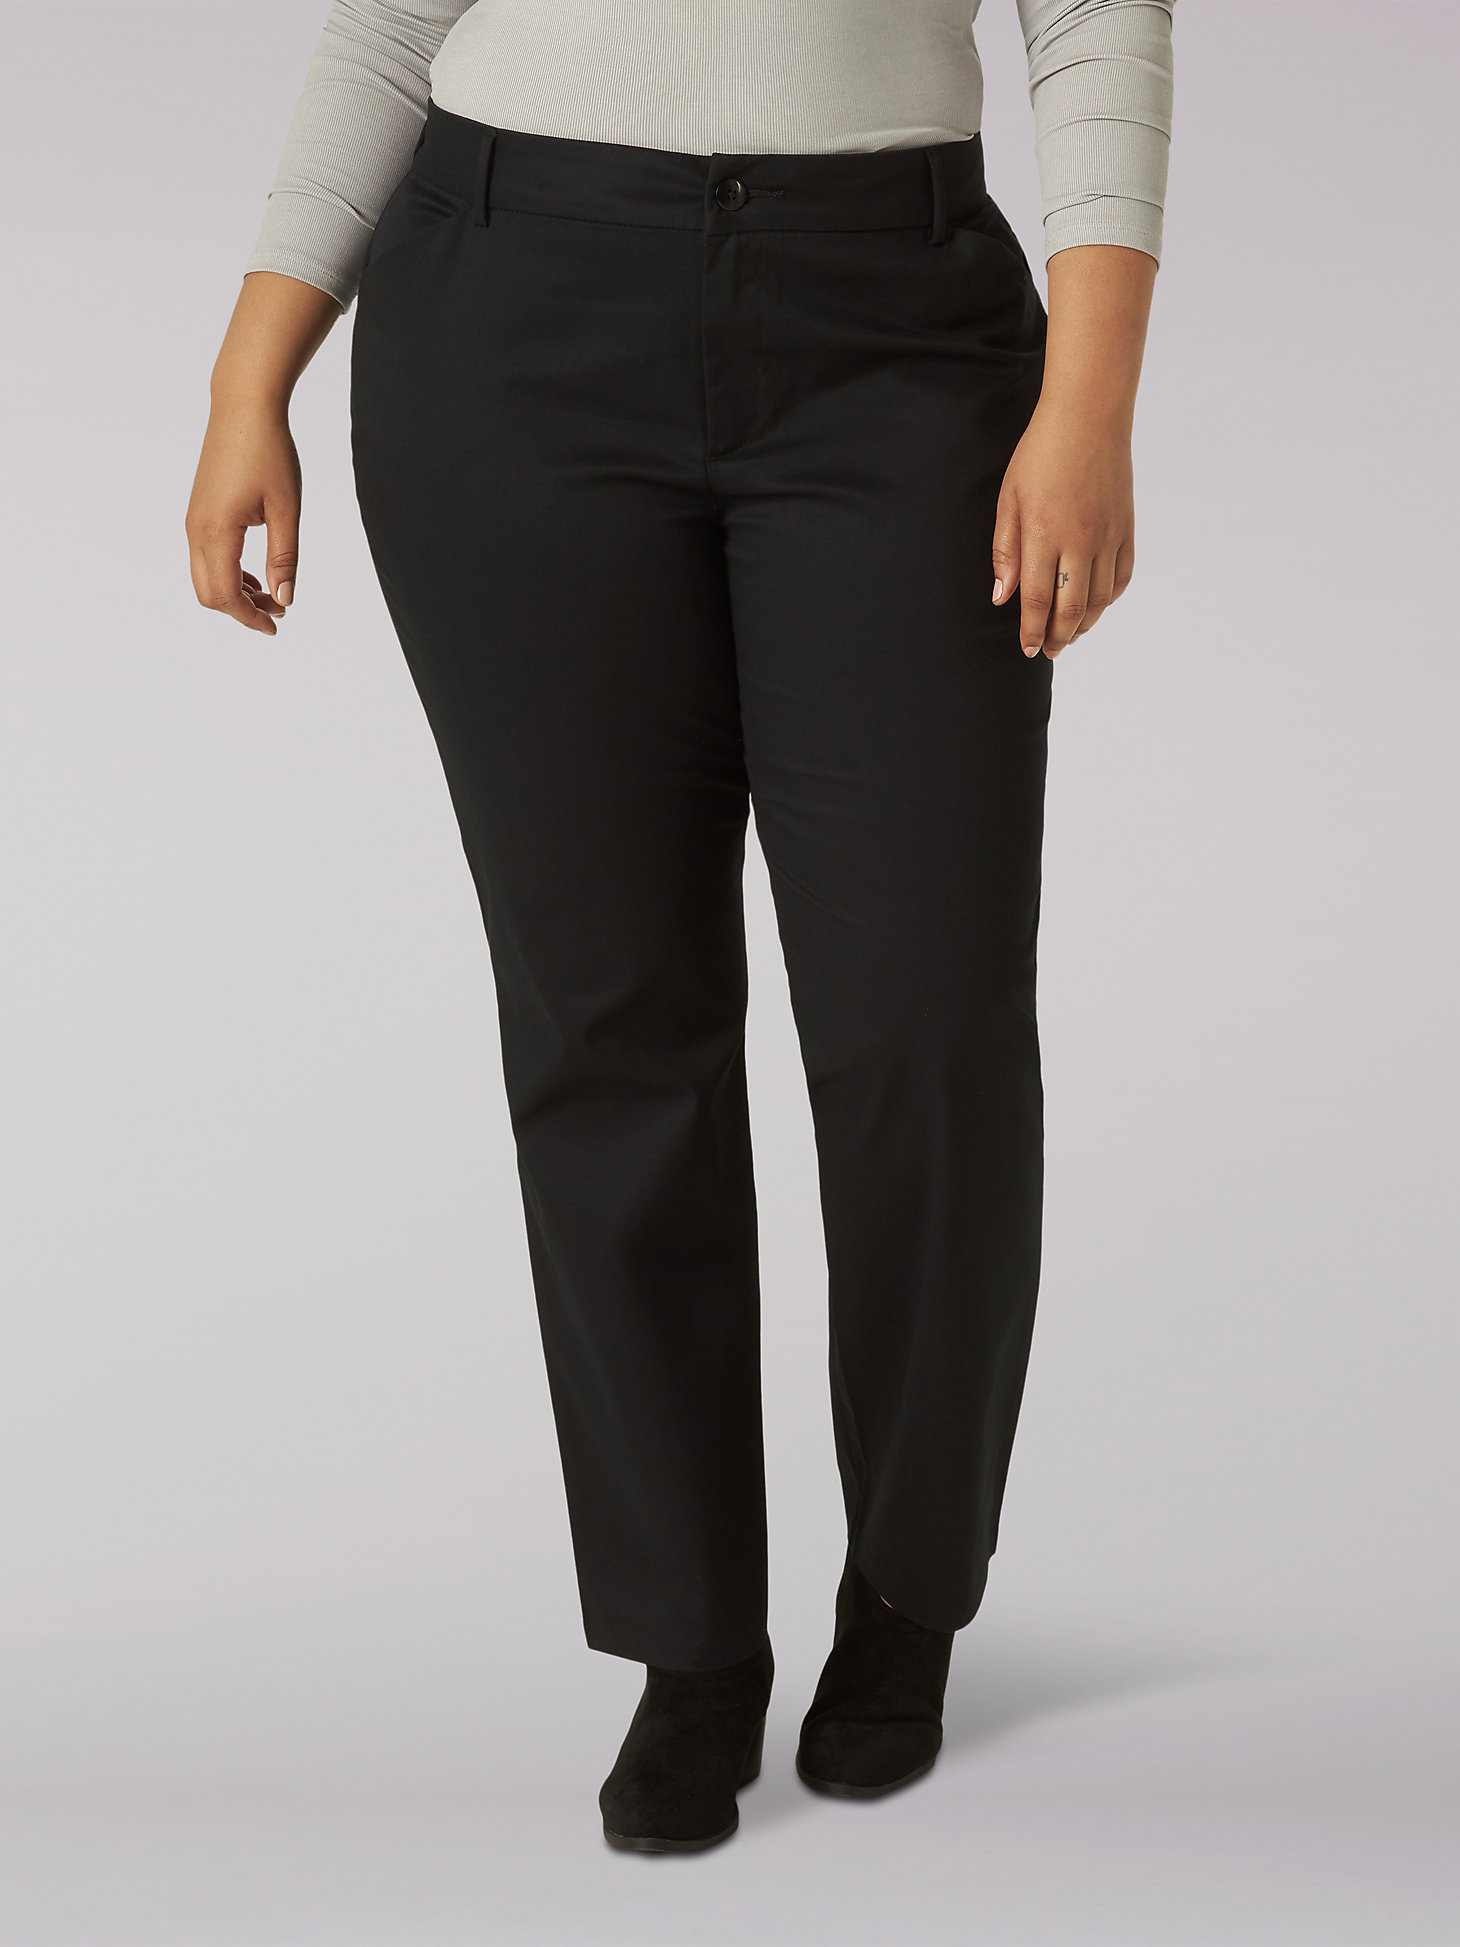 LEE Womens Plus Size Relaxed Fit All Day Straight Leg Pant